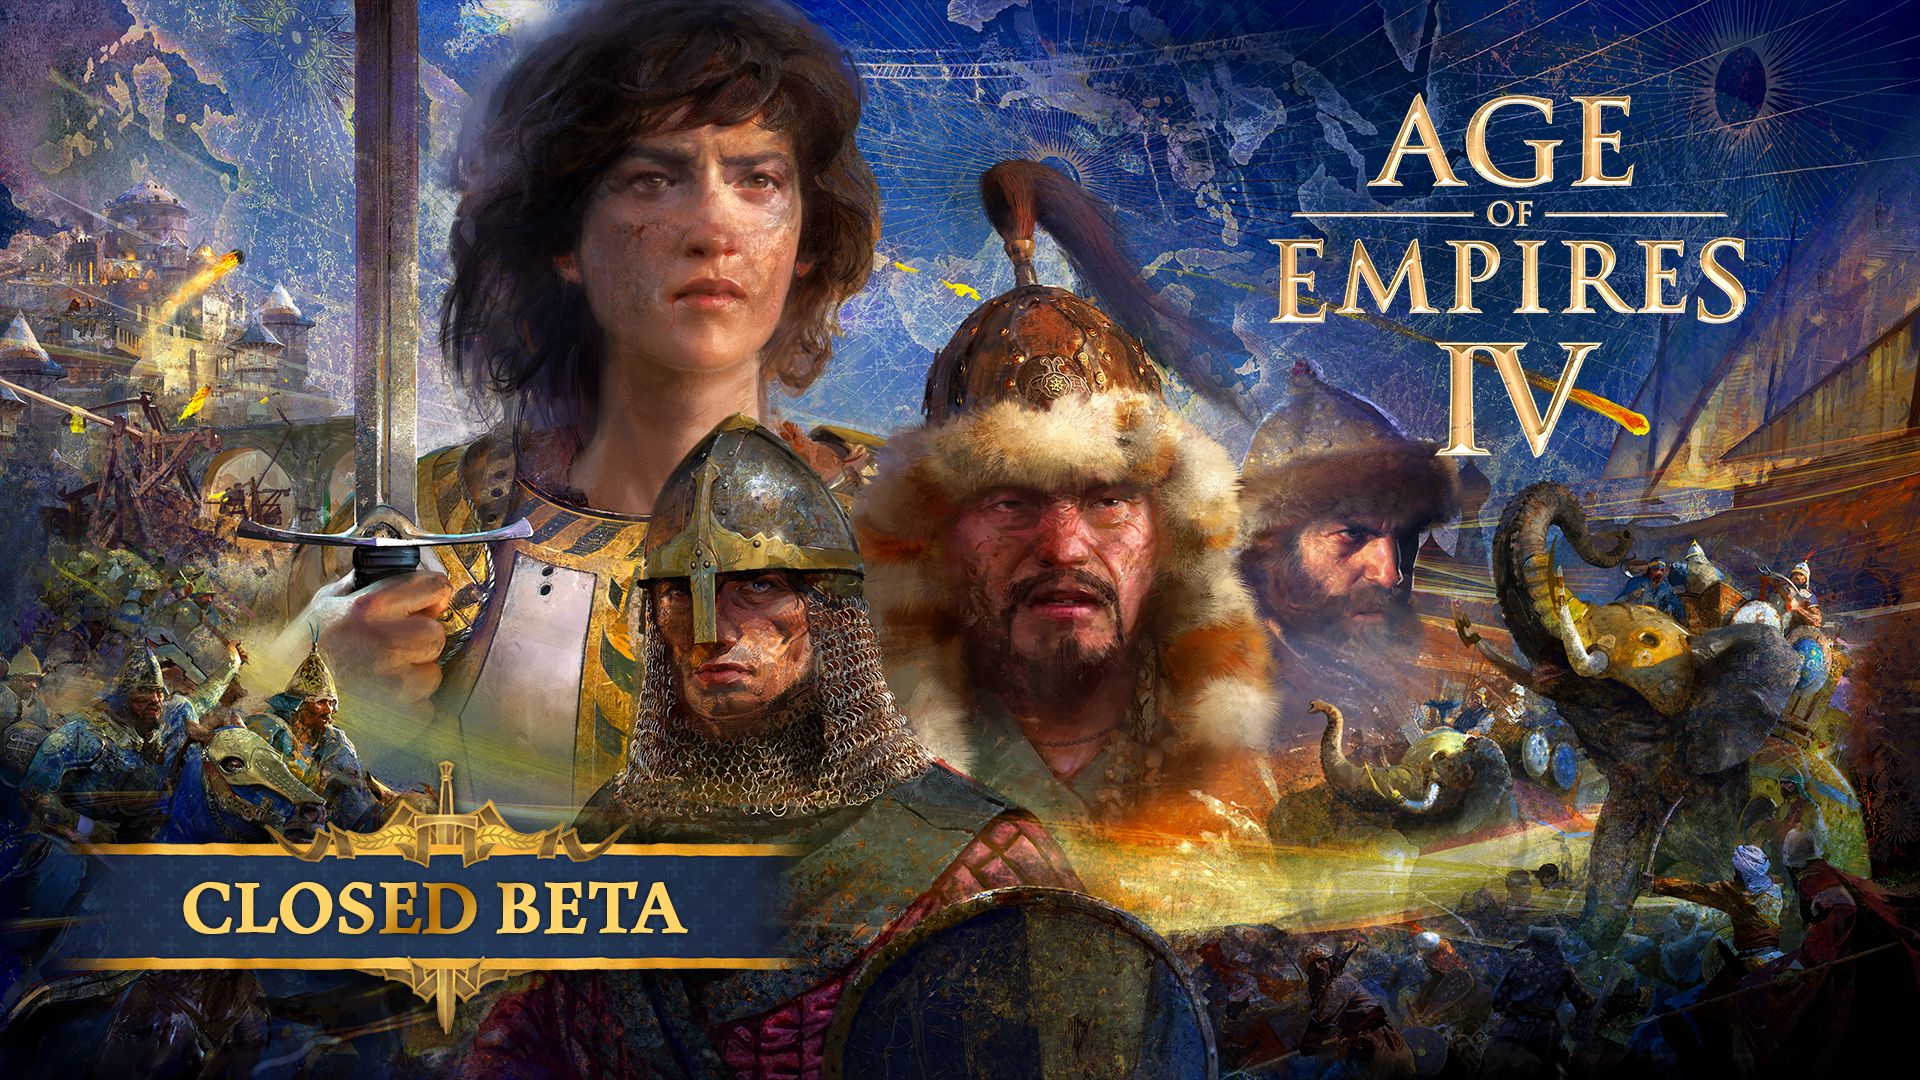 age of empires 4 reviews